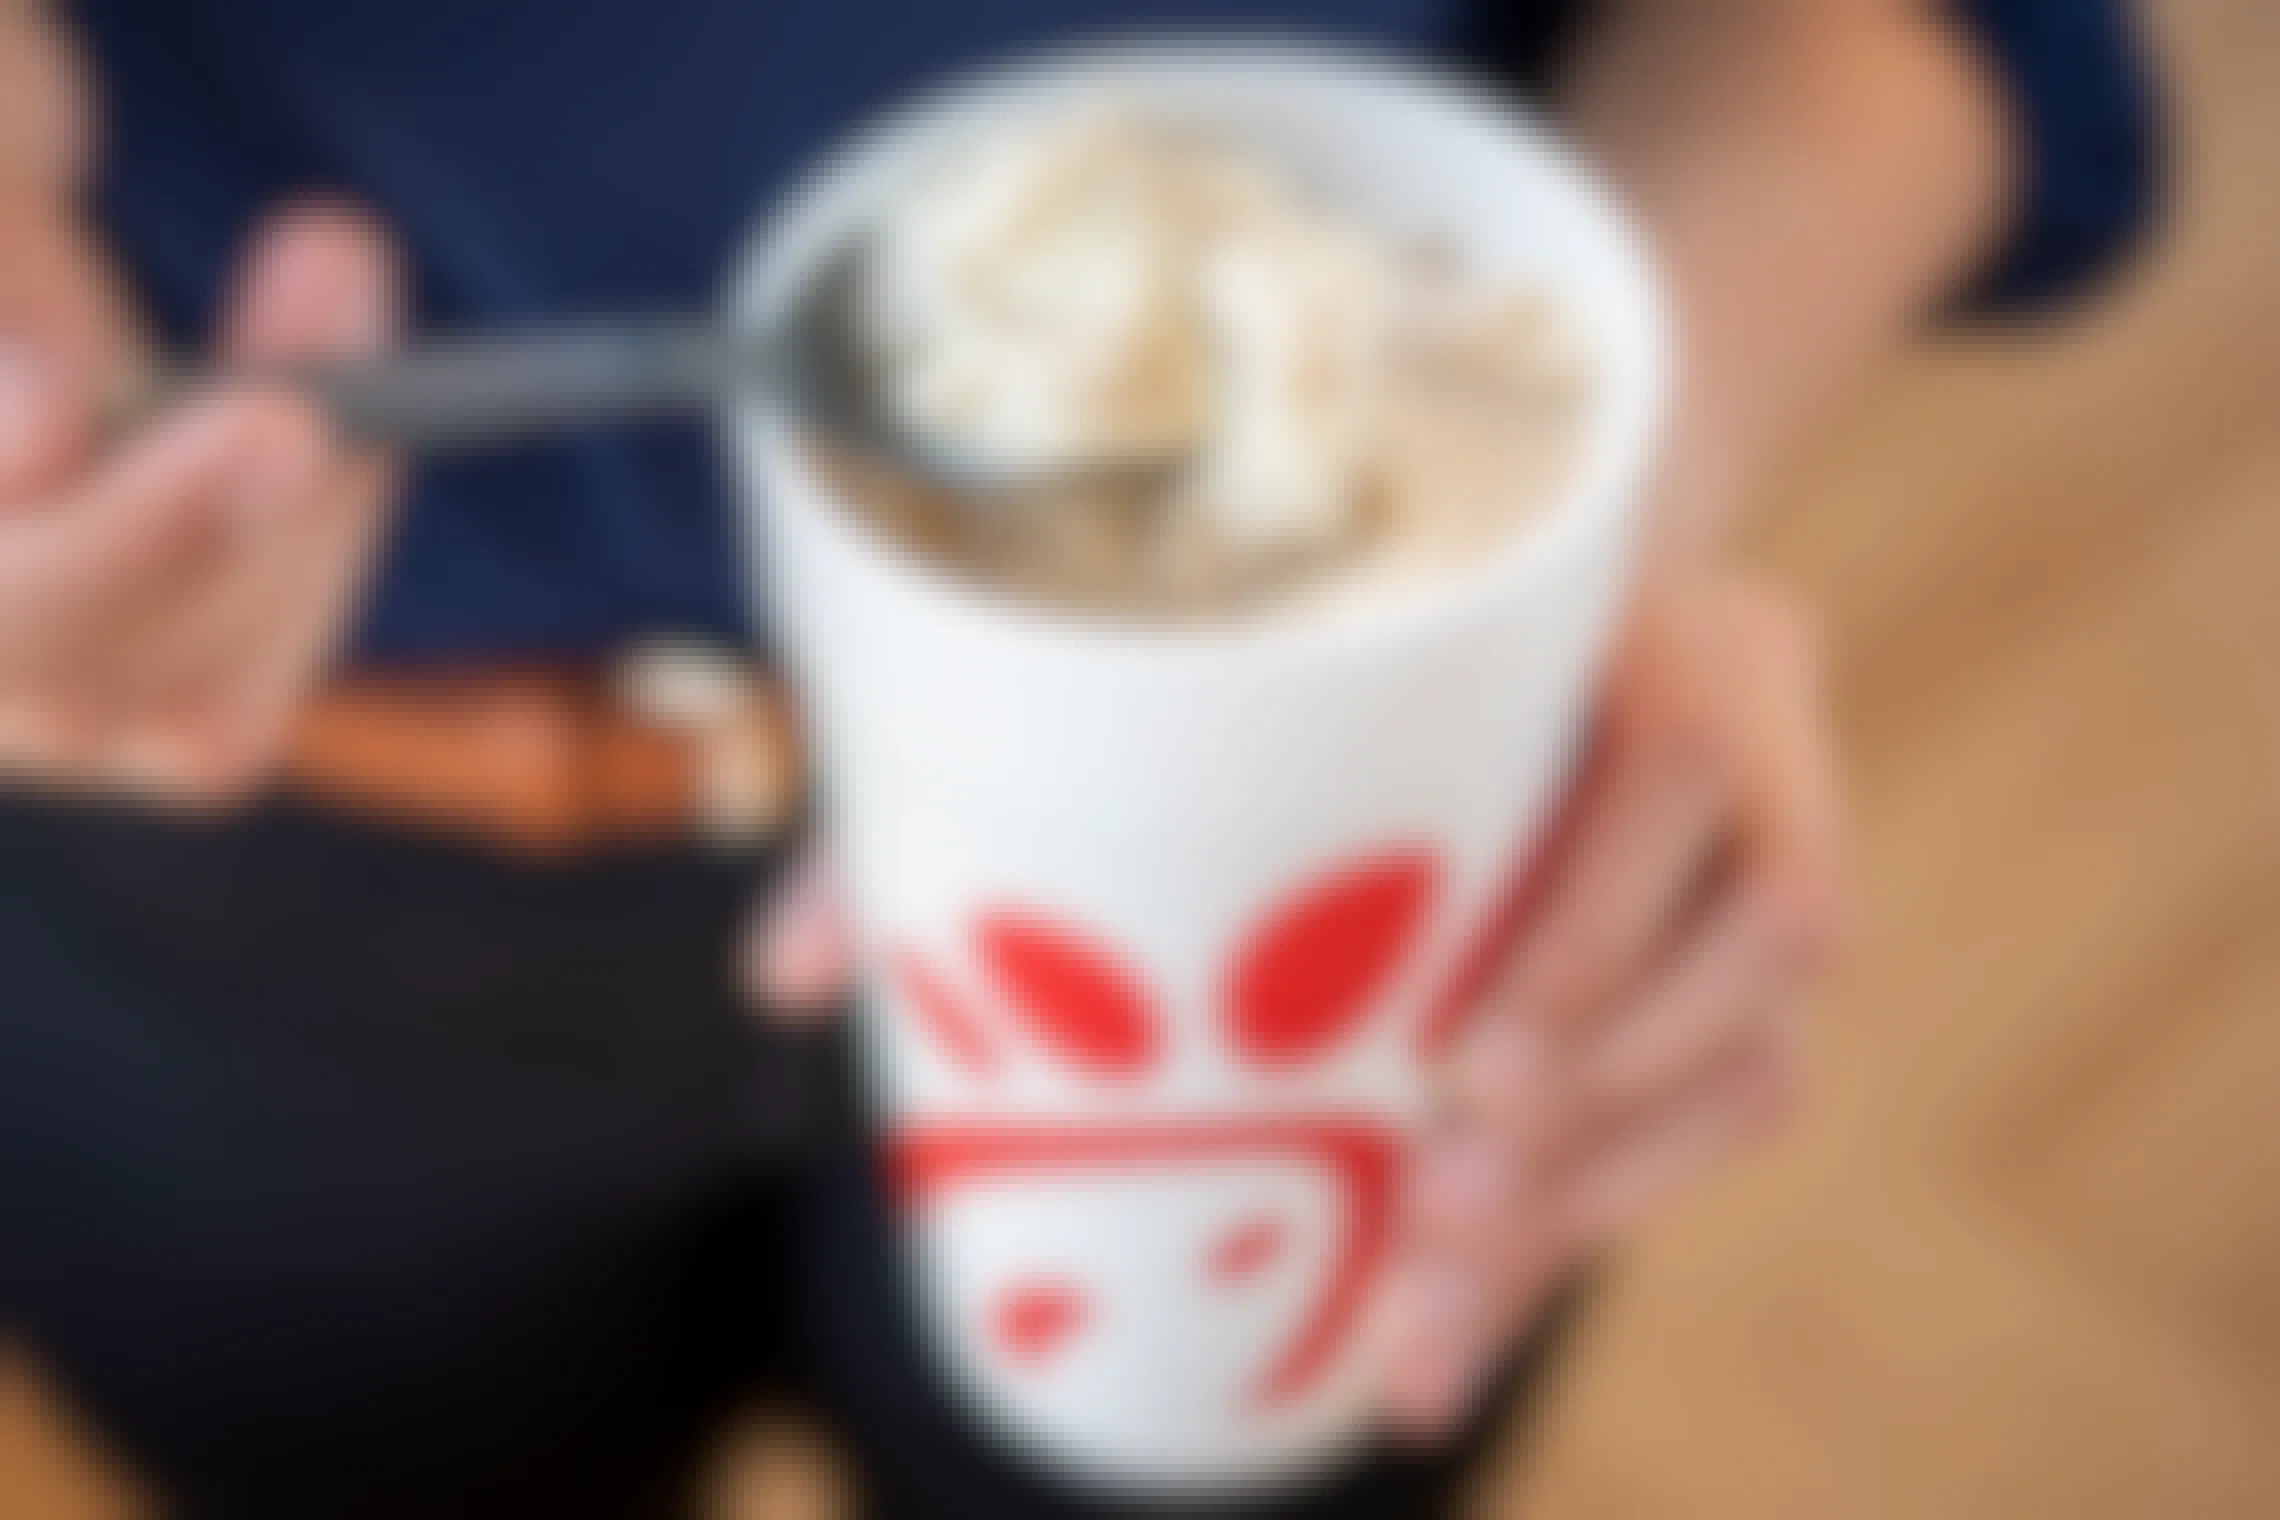 A person using a spoon to scoop ice cream from a root beer float in a Chick-fil-a cup.